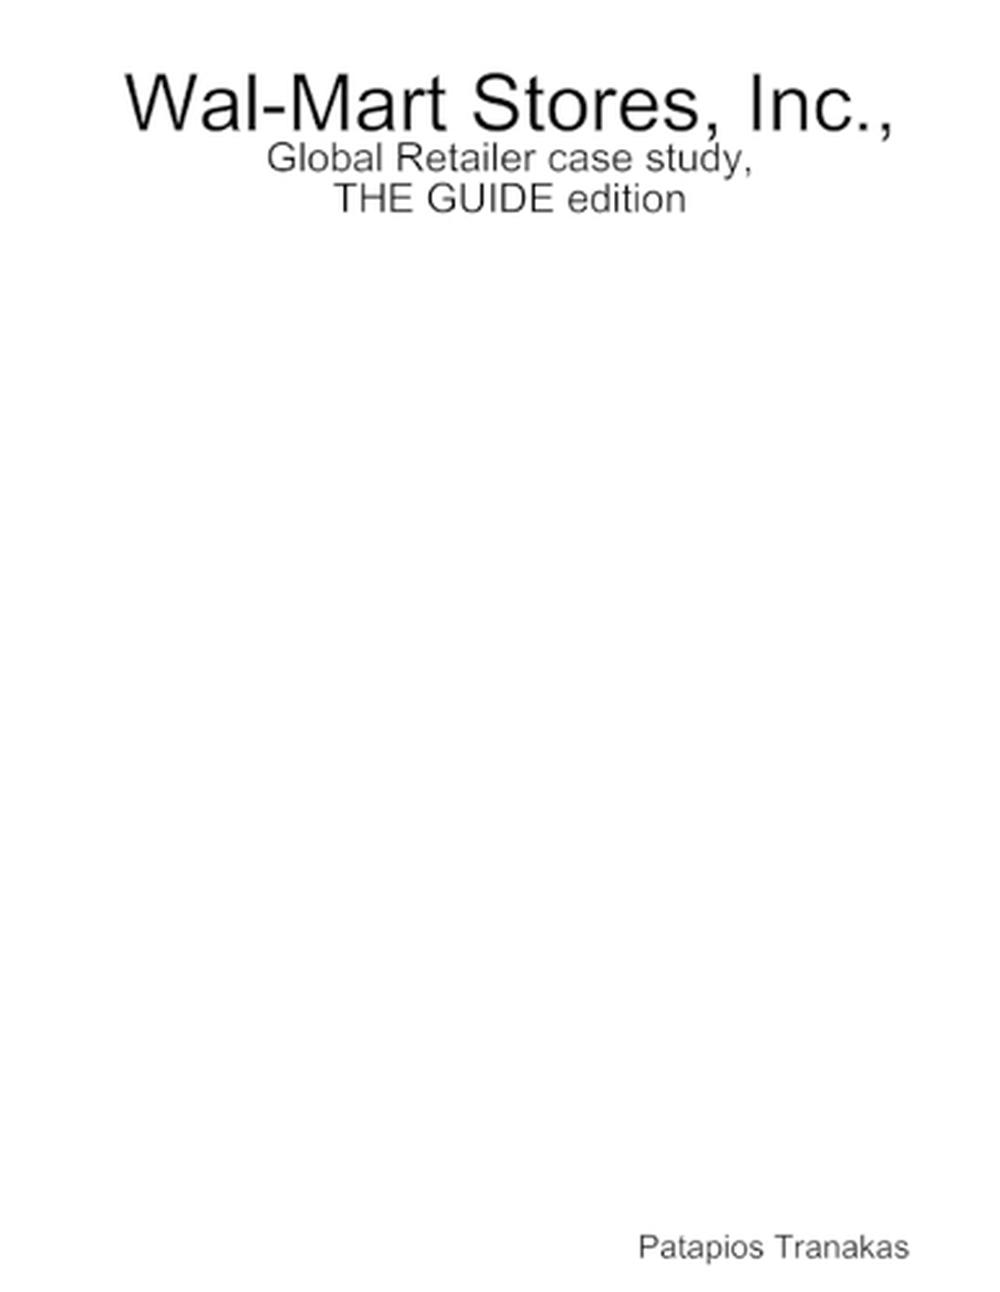 WalMart Stores, Inc., Global Retailer case study, THE GUIDE edition by